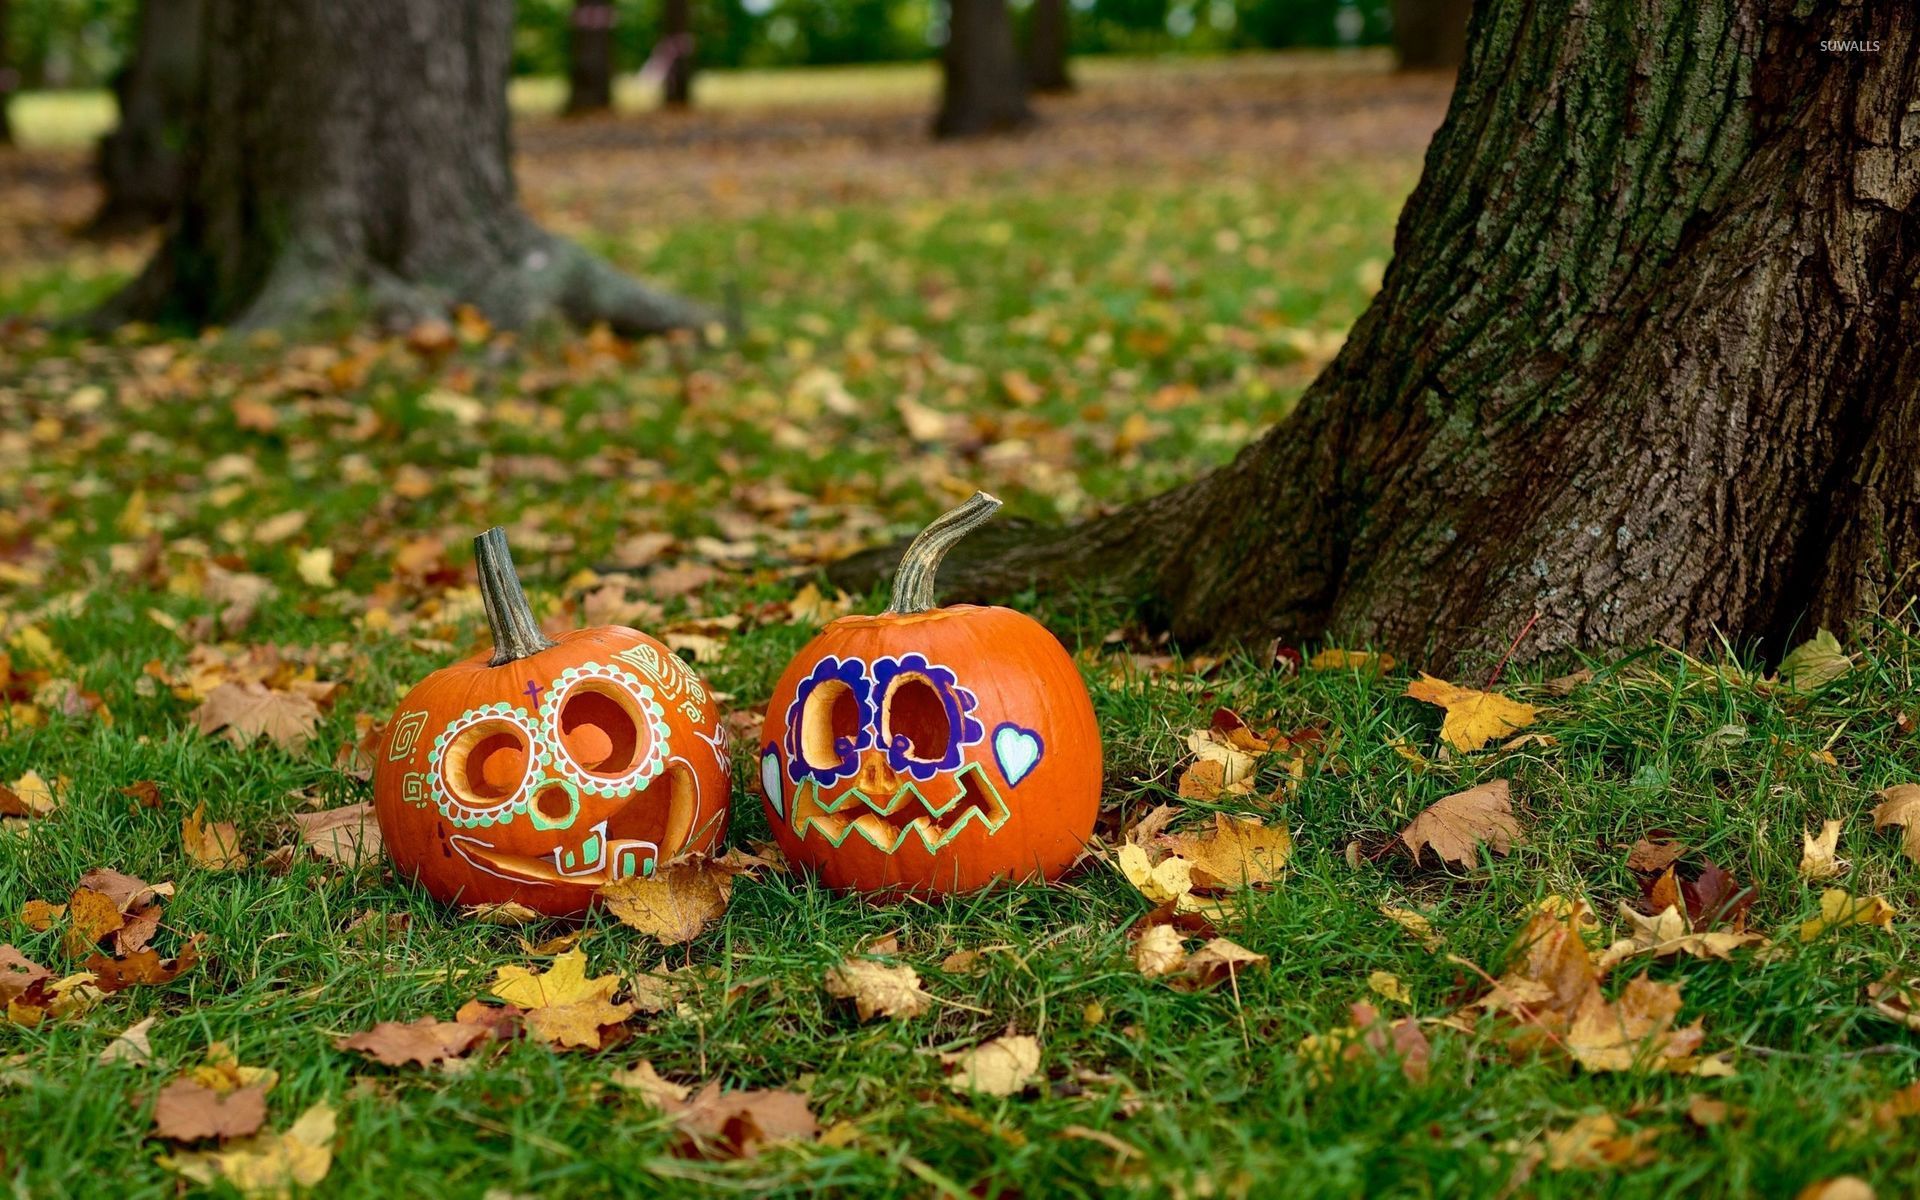 Pumpkins in the grass wallpaper - Holiday wallpapers - #52788